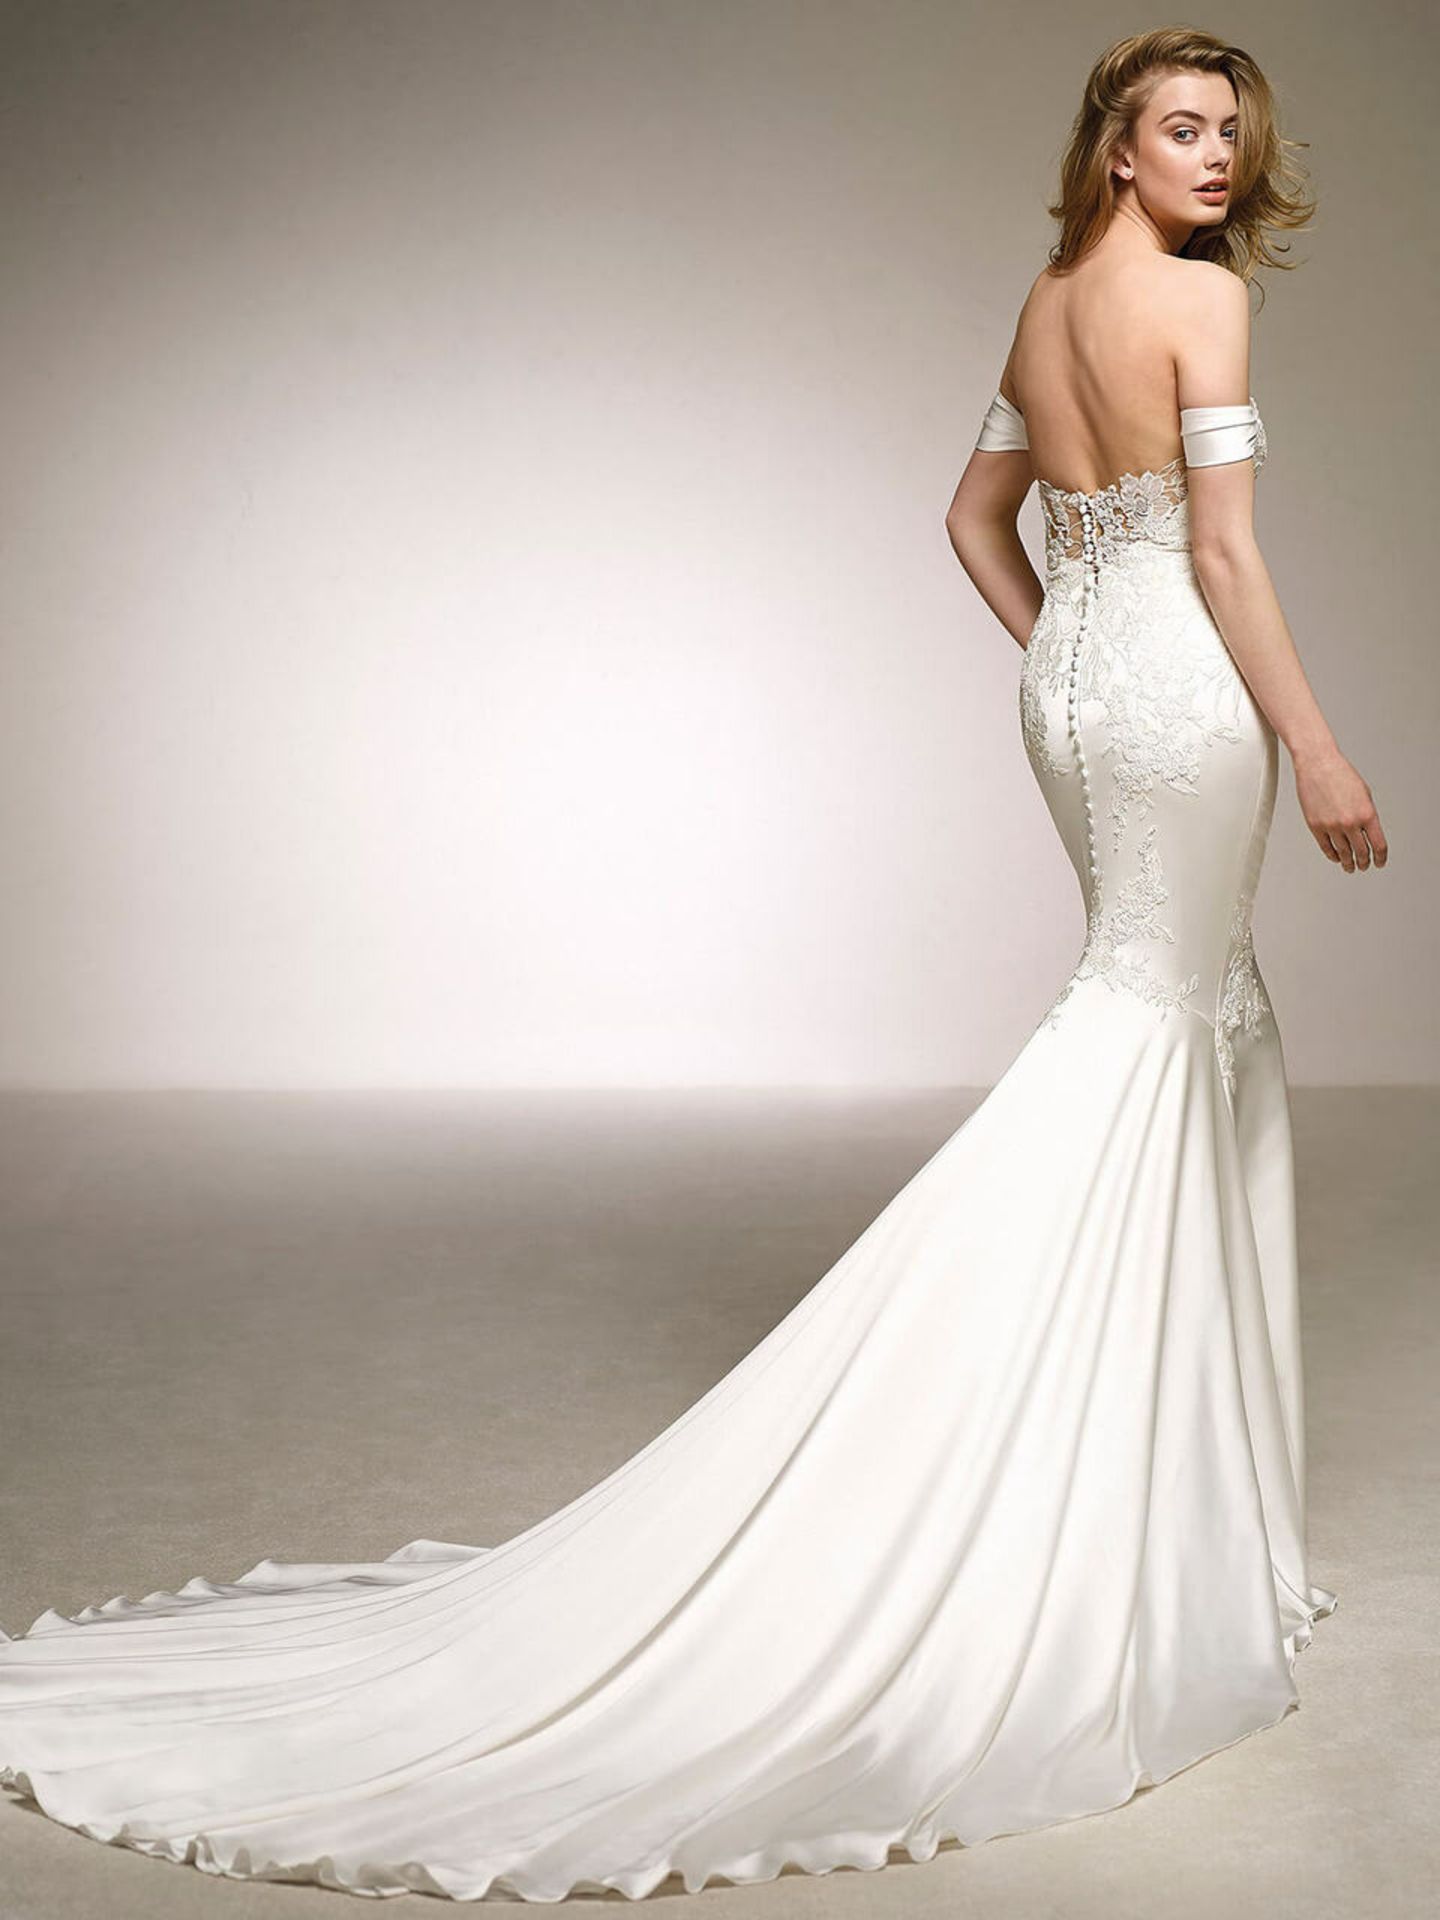 1 x Pronovious Dante Mermaid Bridal Gown With Floral Lace Highlights - Size UK 10 - RRP £1,640 - Image 11 of 13